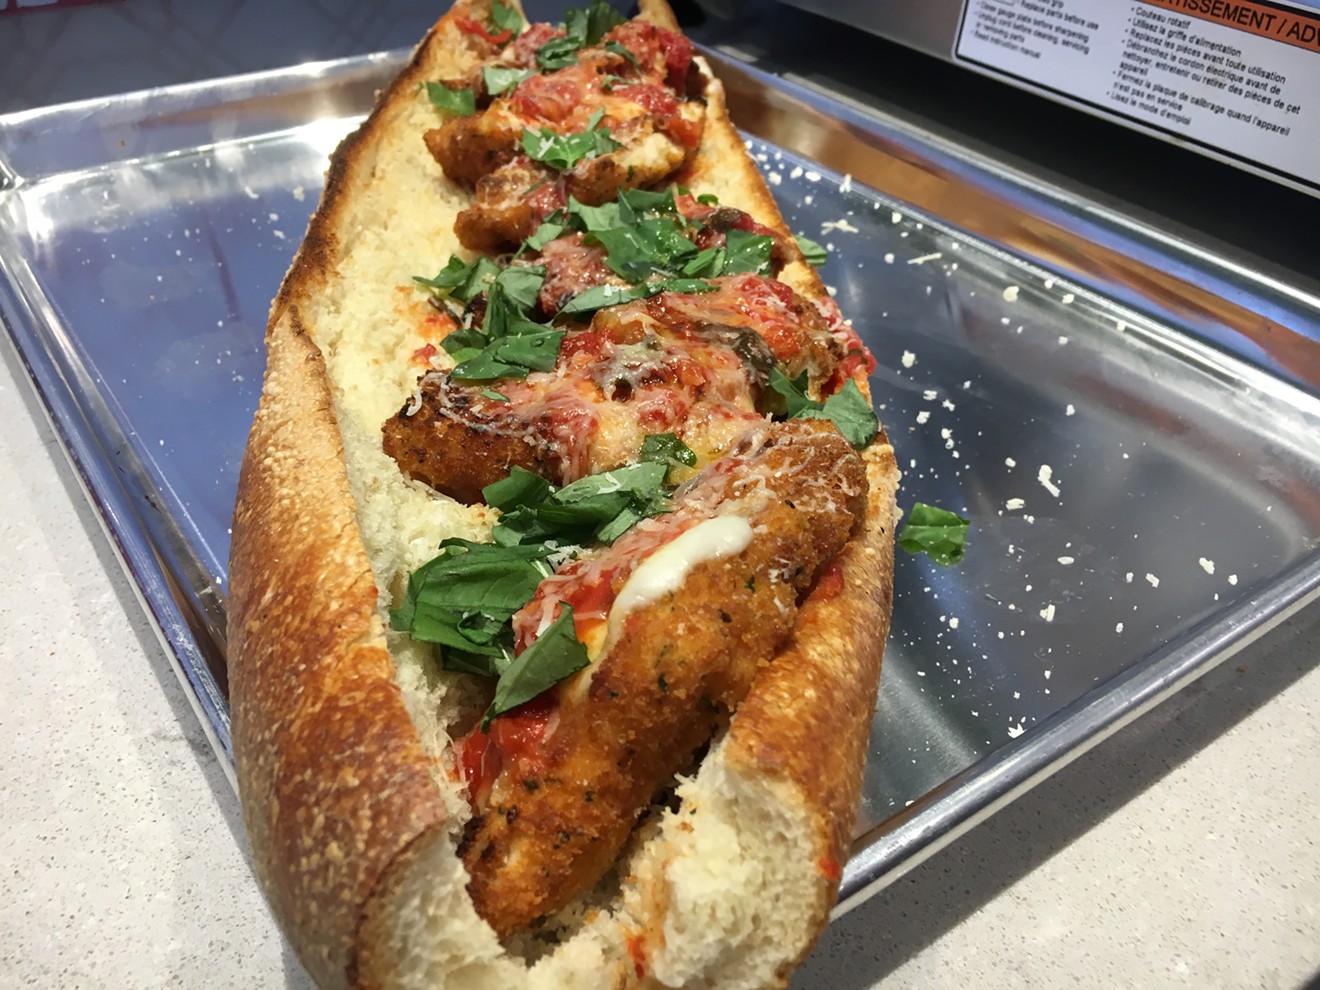 A chicken Parmesan sub with breading made from bagel crumbs.